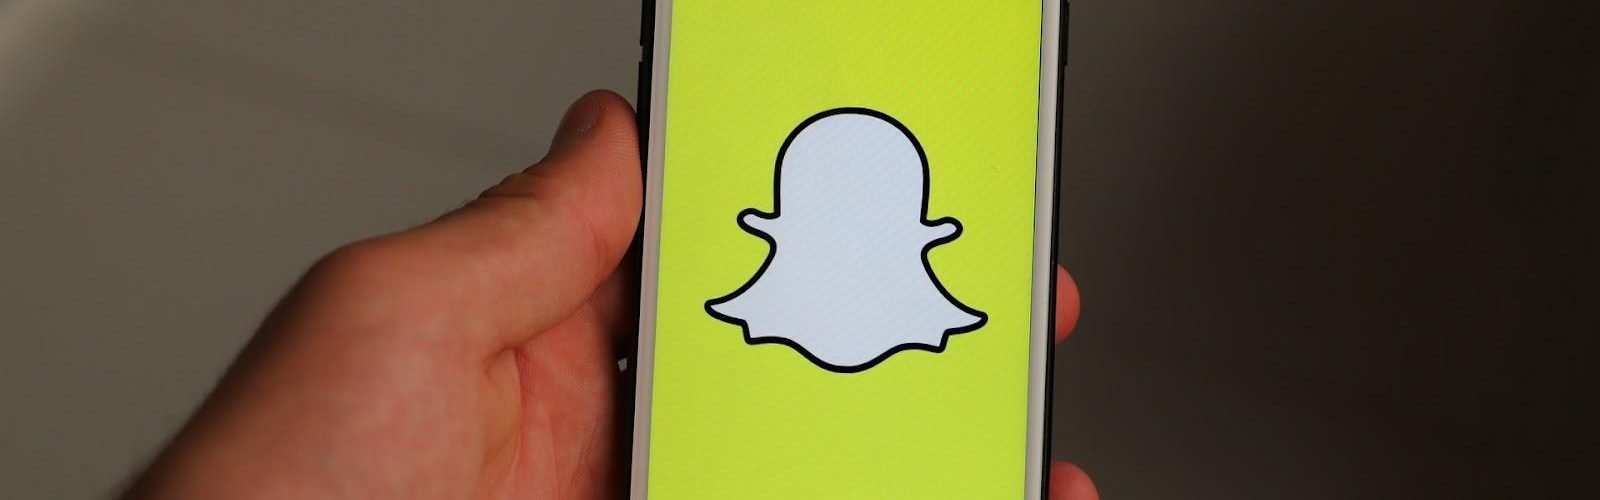 Top 6 Easy Ways to Fix Snapchat When It's Not Working